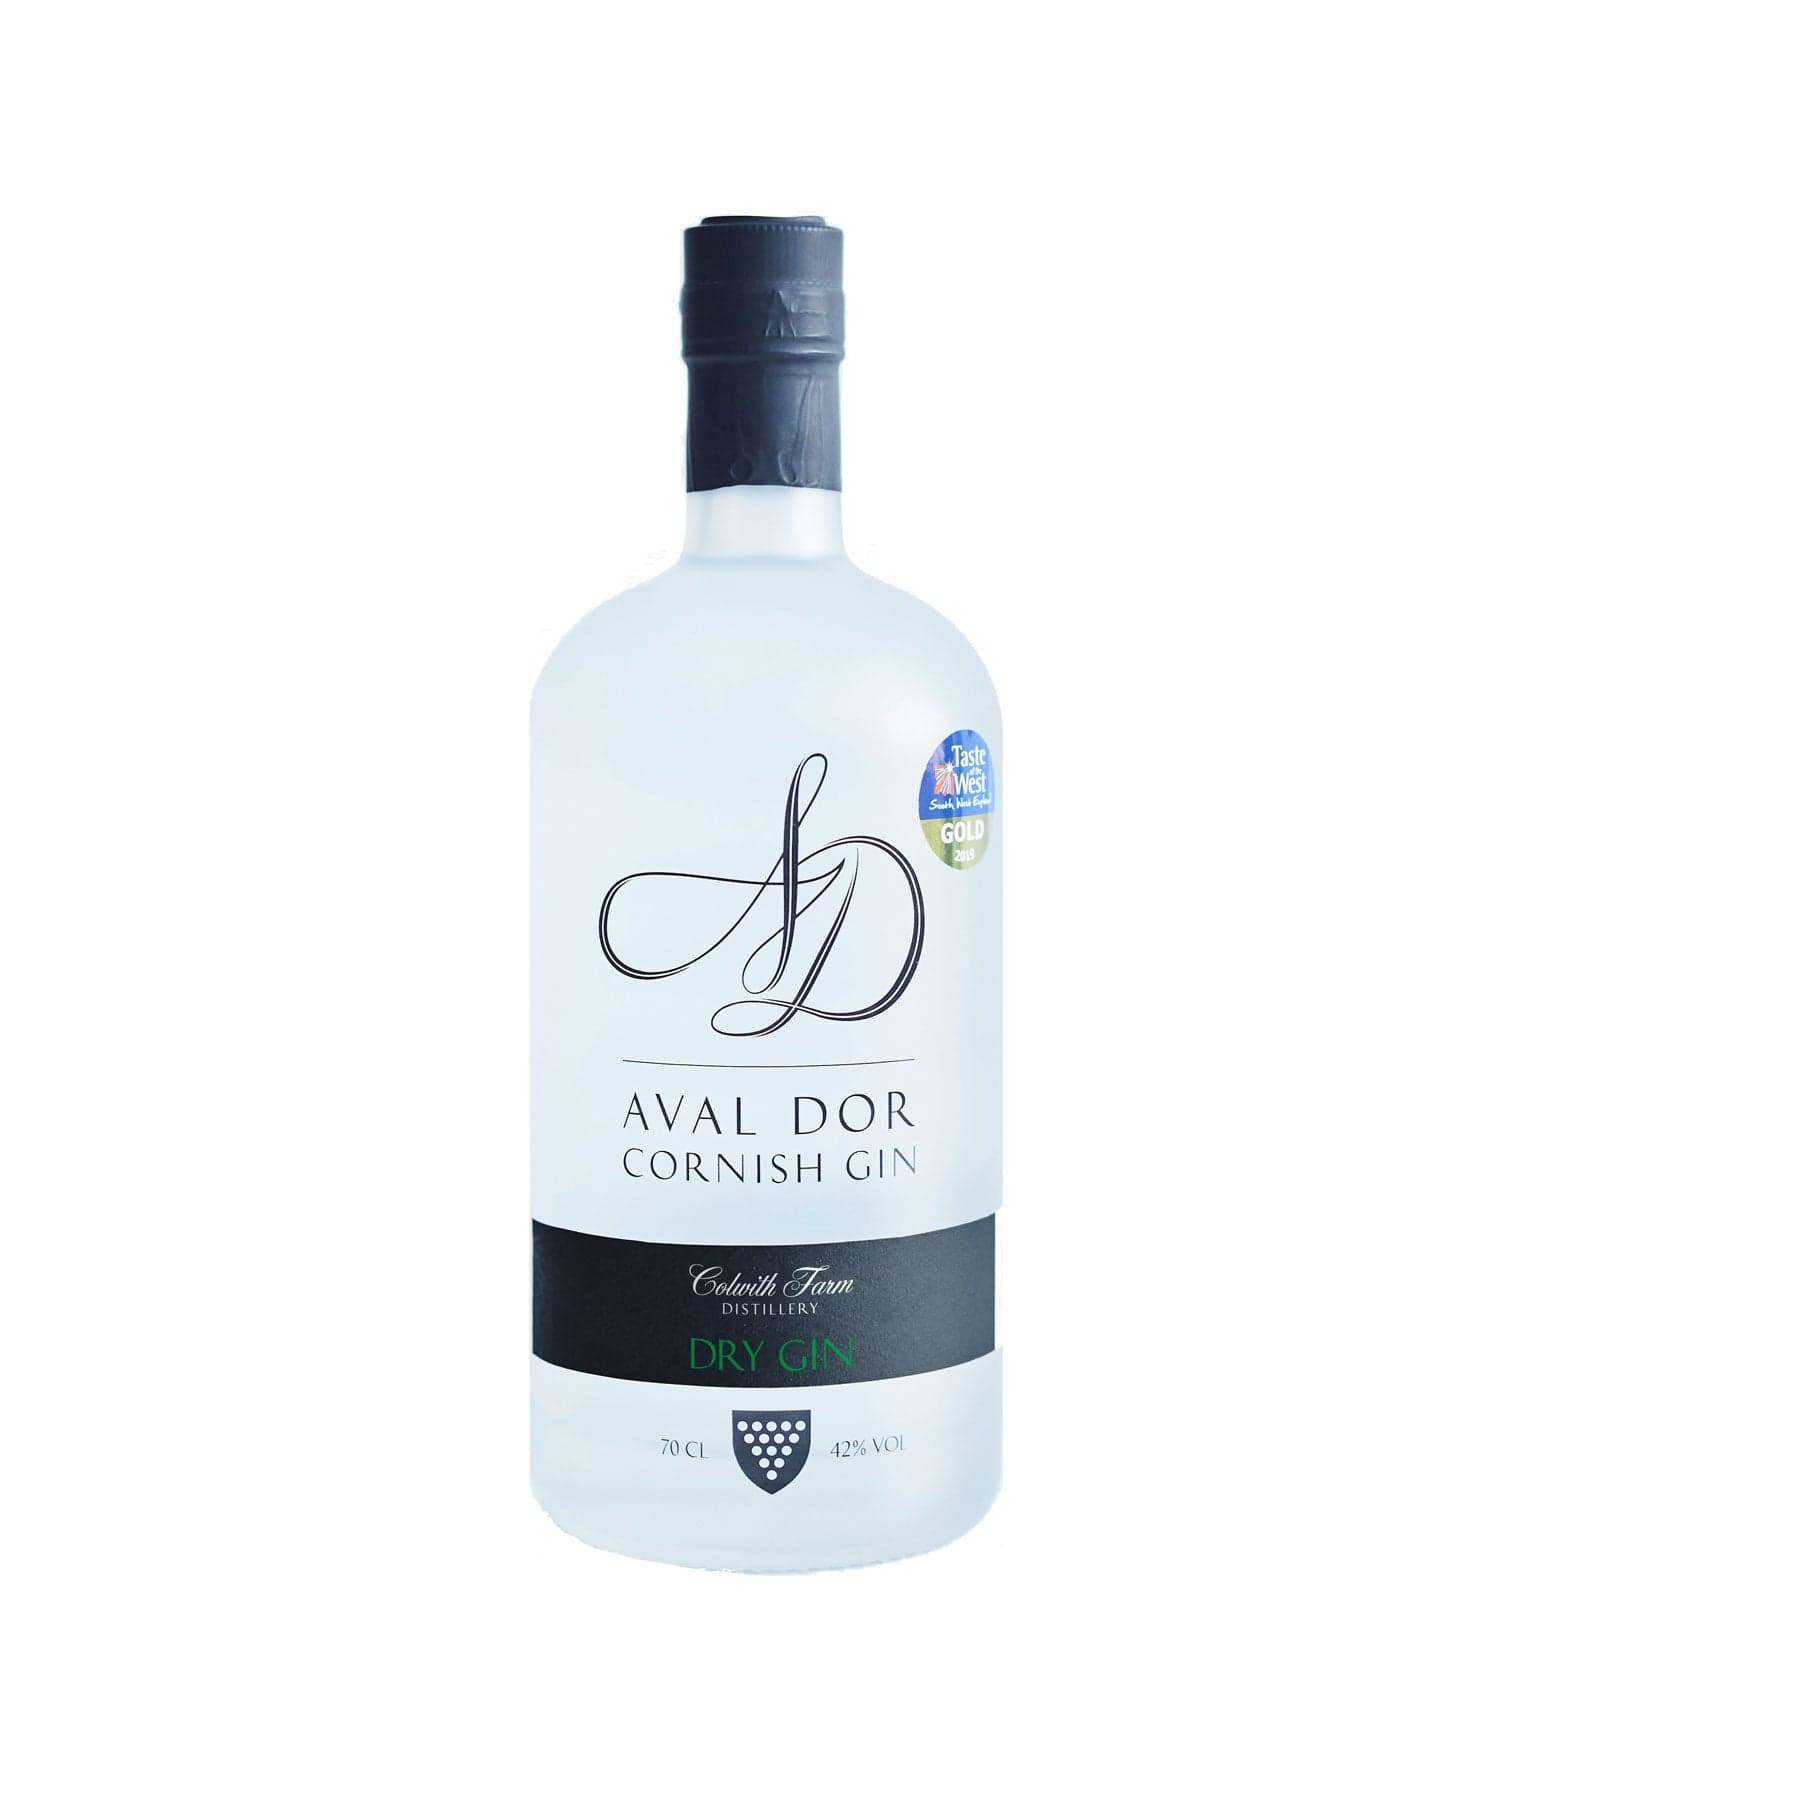 Aval Dor dry gin 35cl